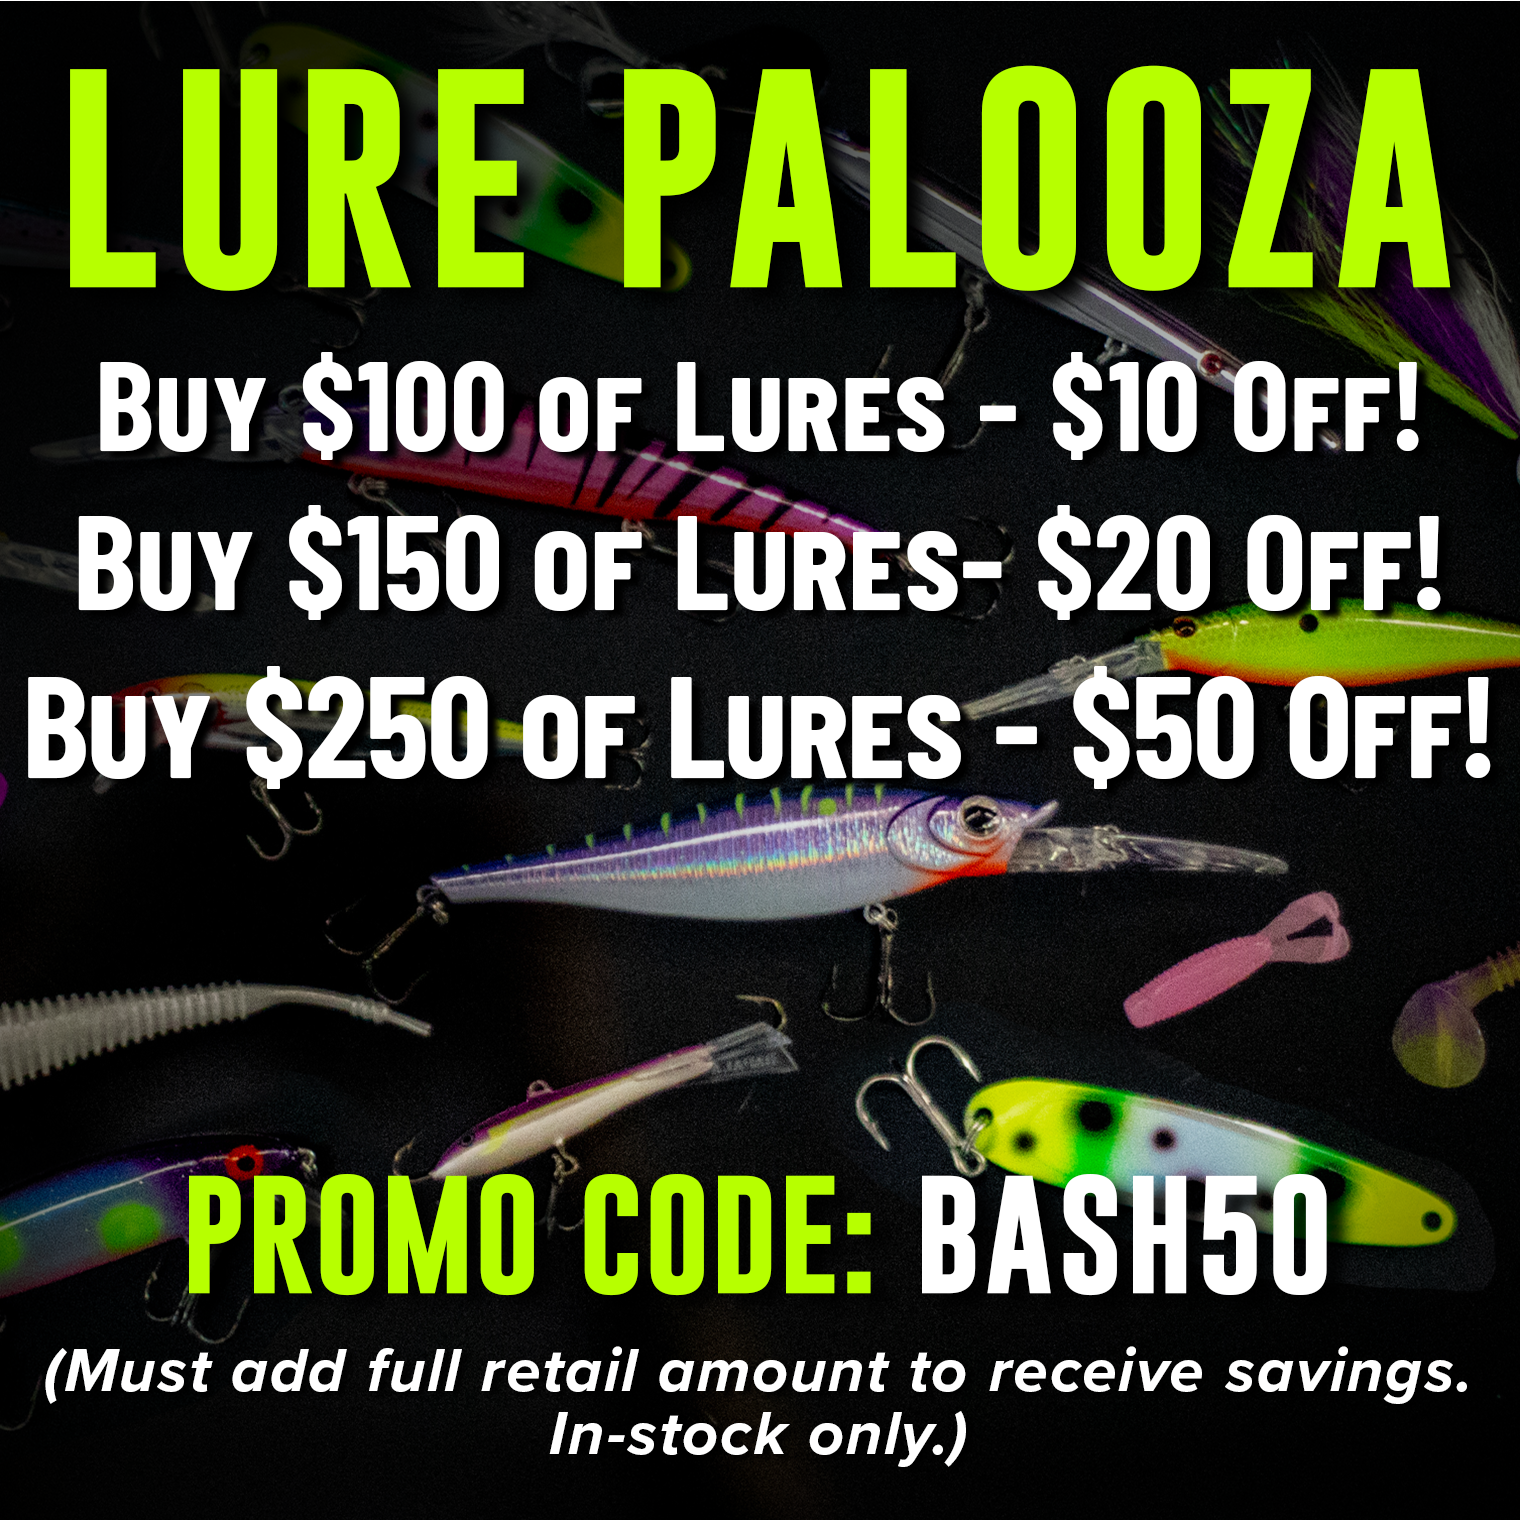 Lure Palooza! Buy $100 of Lures - $10 Off Buy $150 Of Lures - $20 Off! Buy $250 0f Lures - $50 Off! Promo Code: BASH50 (Must add full retail amount to receive savings. In-stock only.)